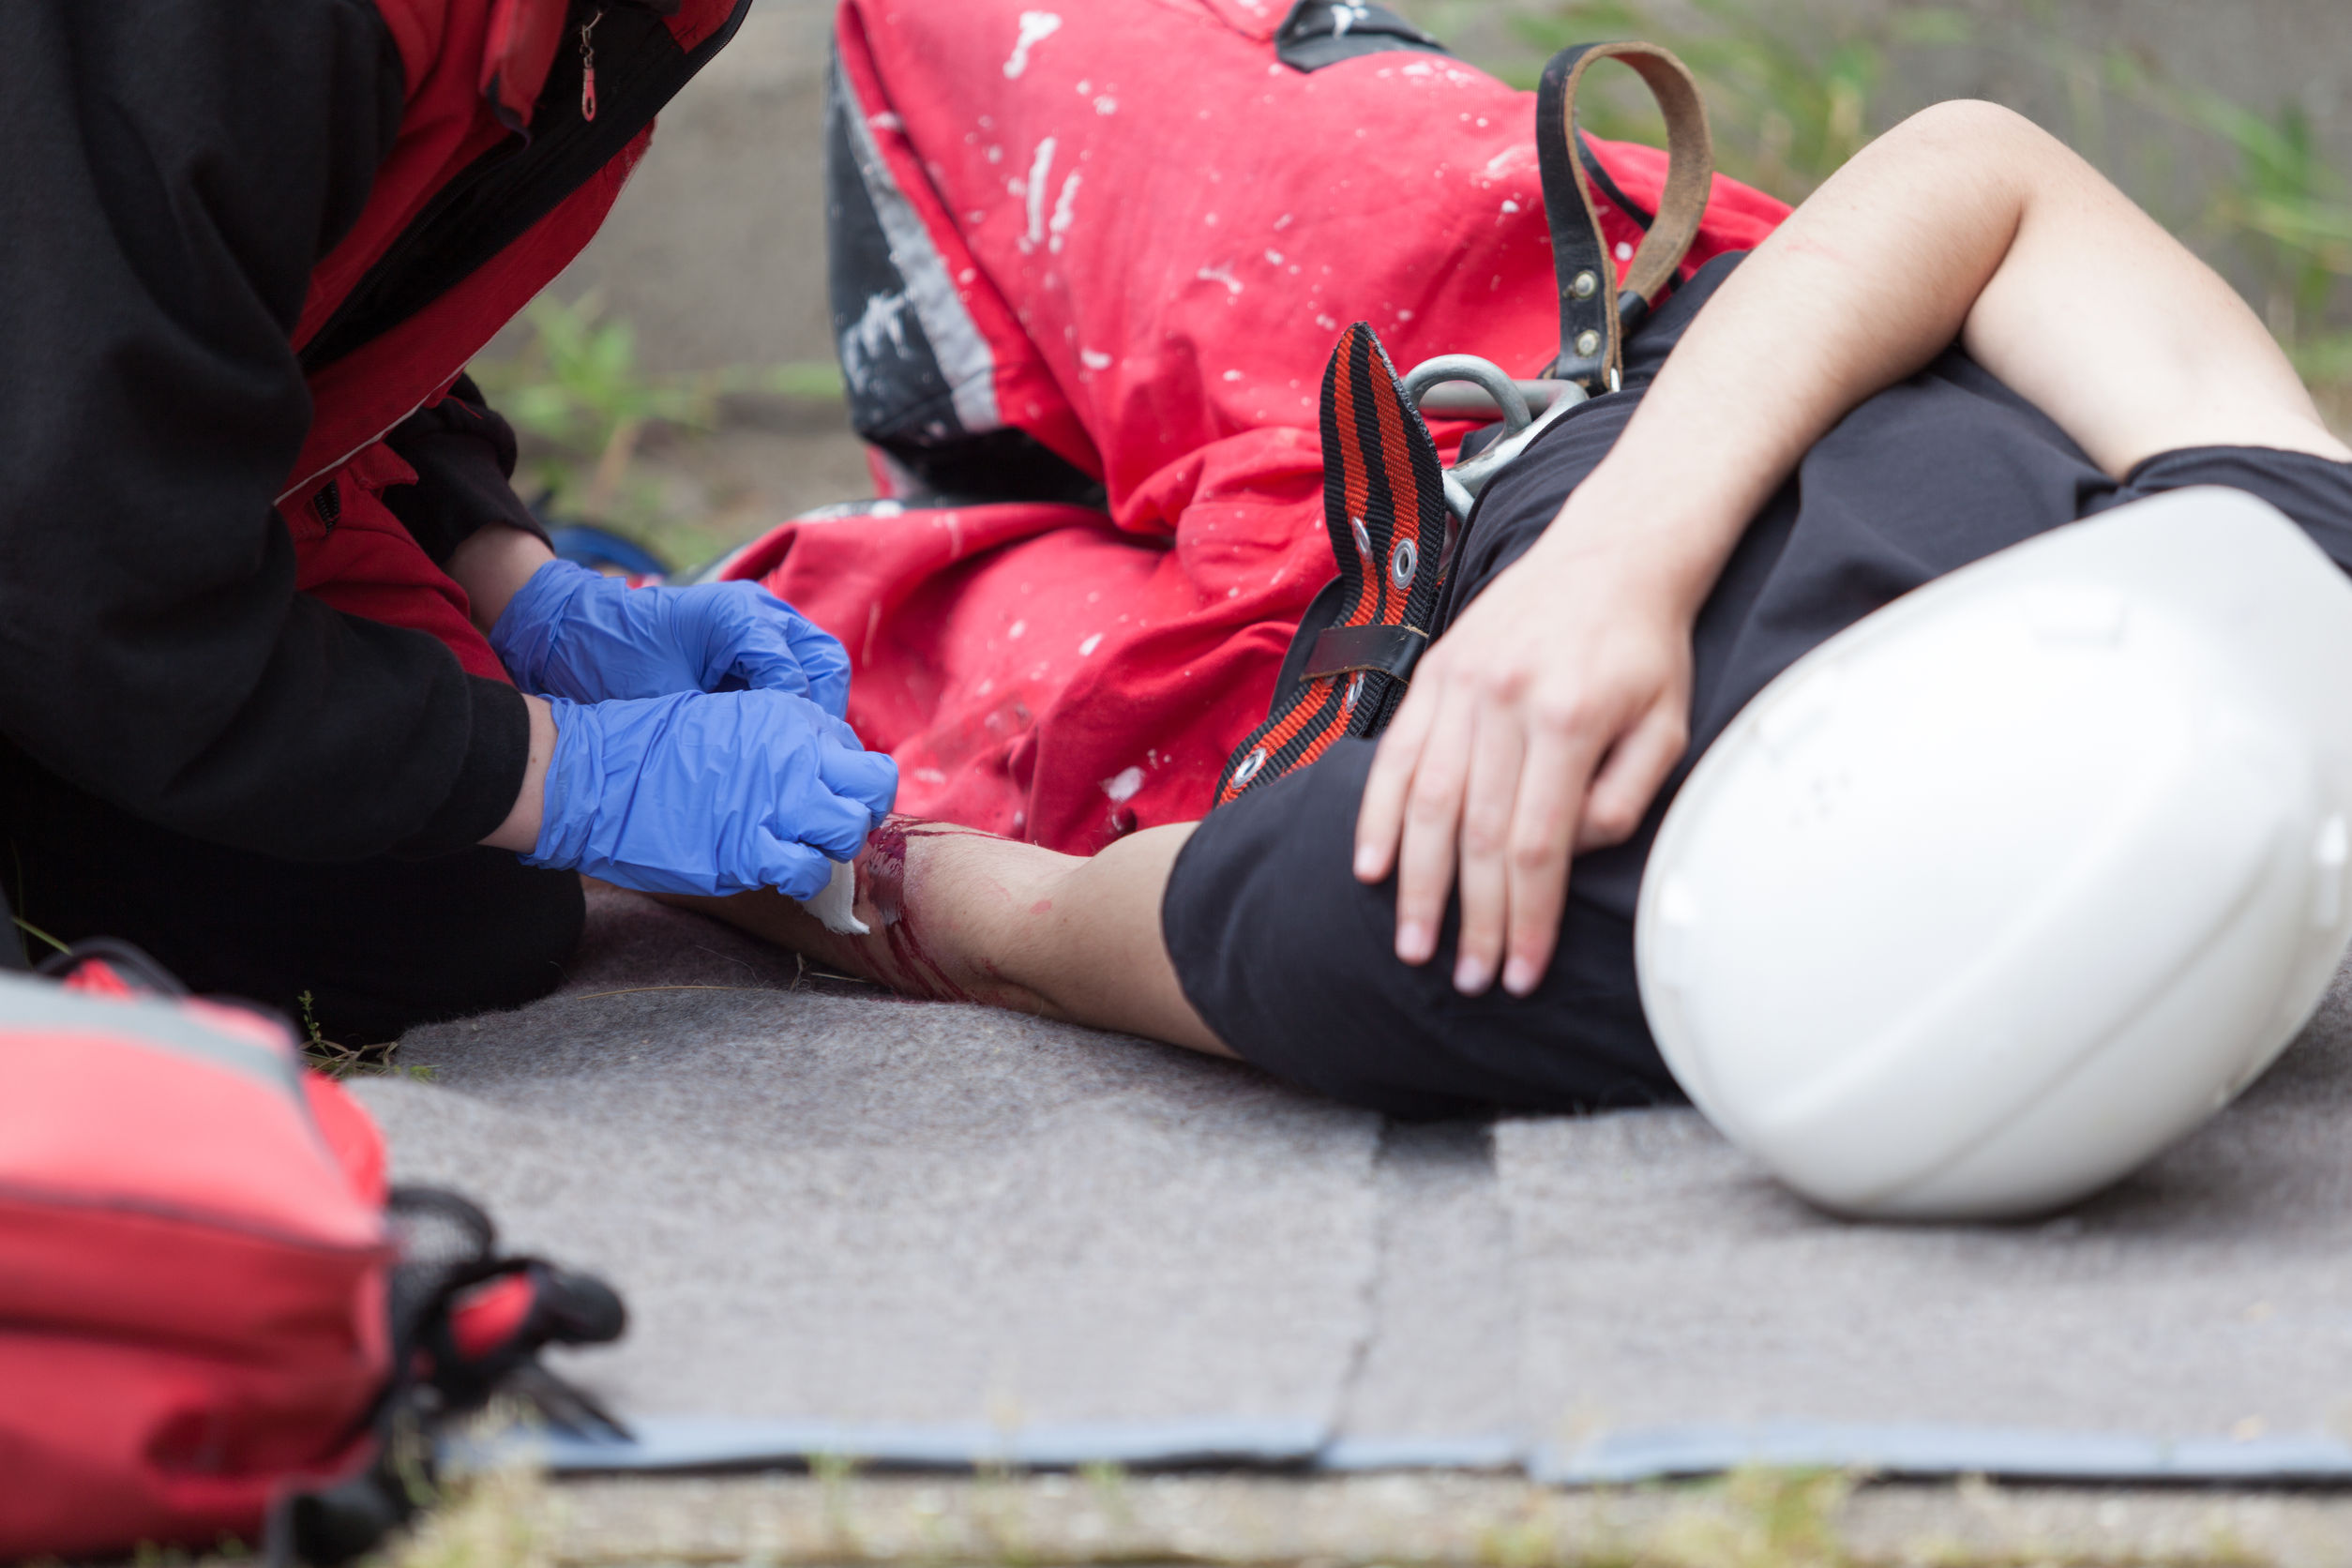 Reasons to Hire a Construction Accident Injury Lawyer in Pittsburgh, PA